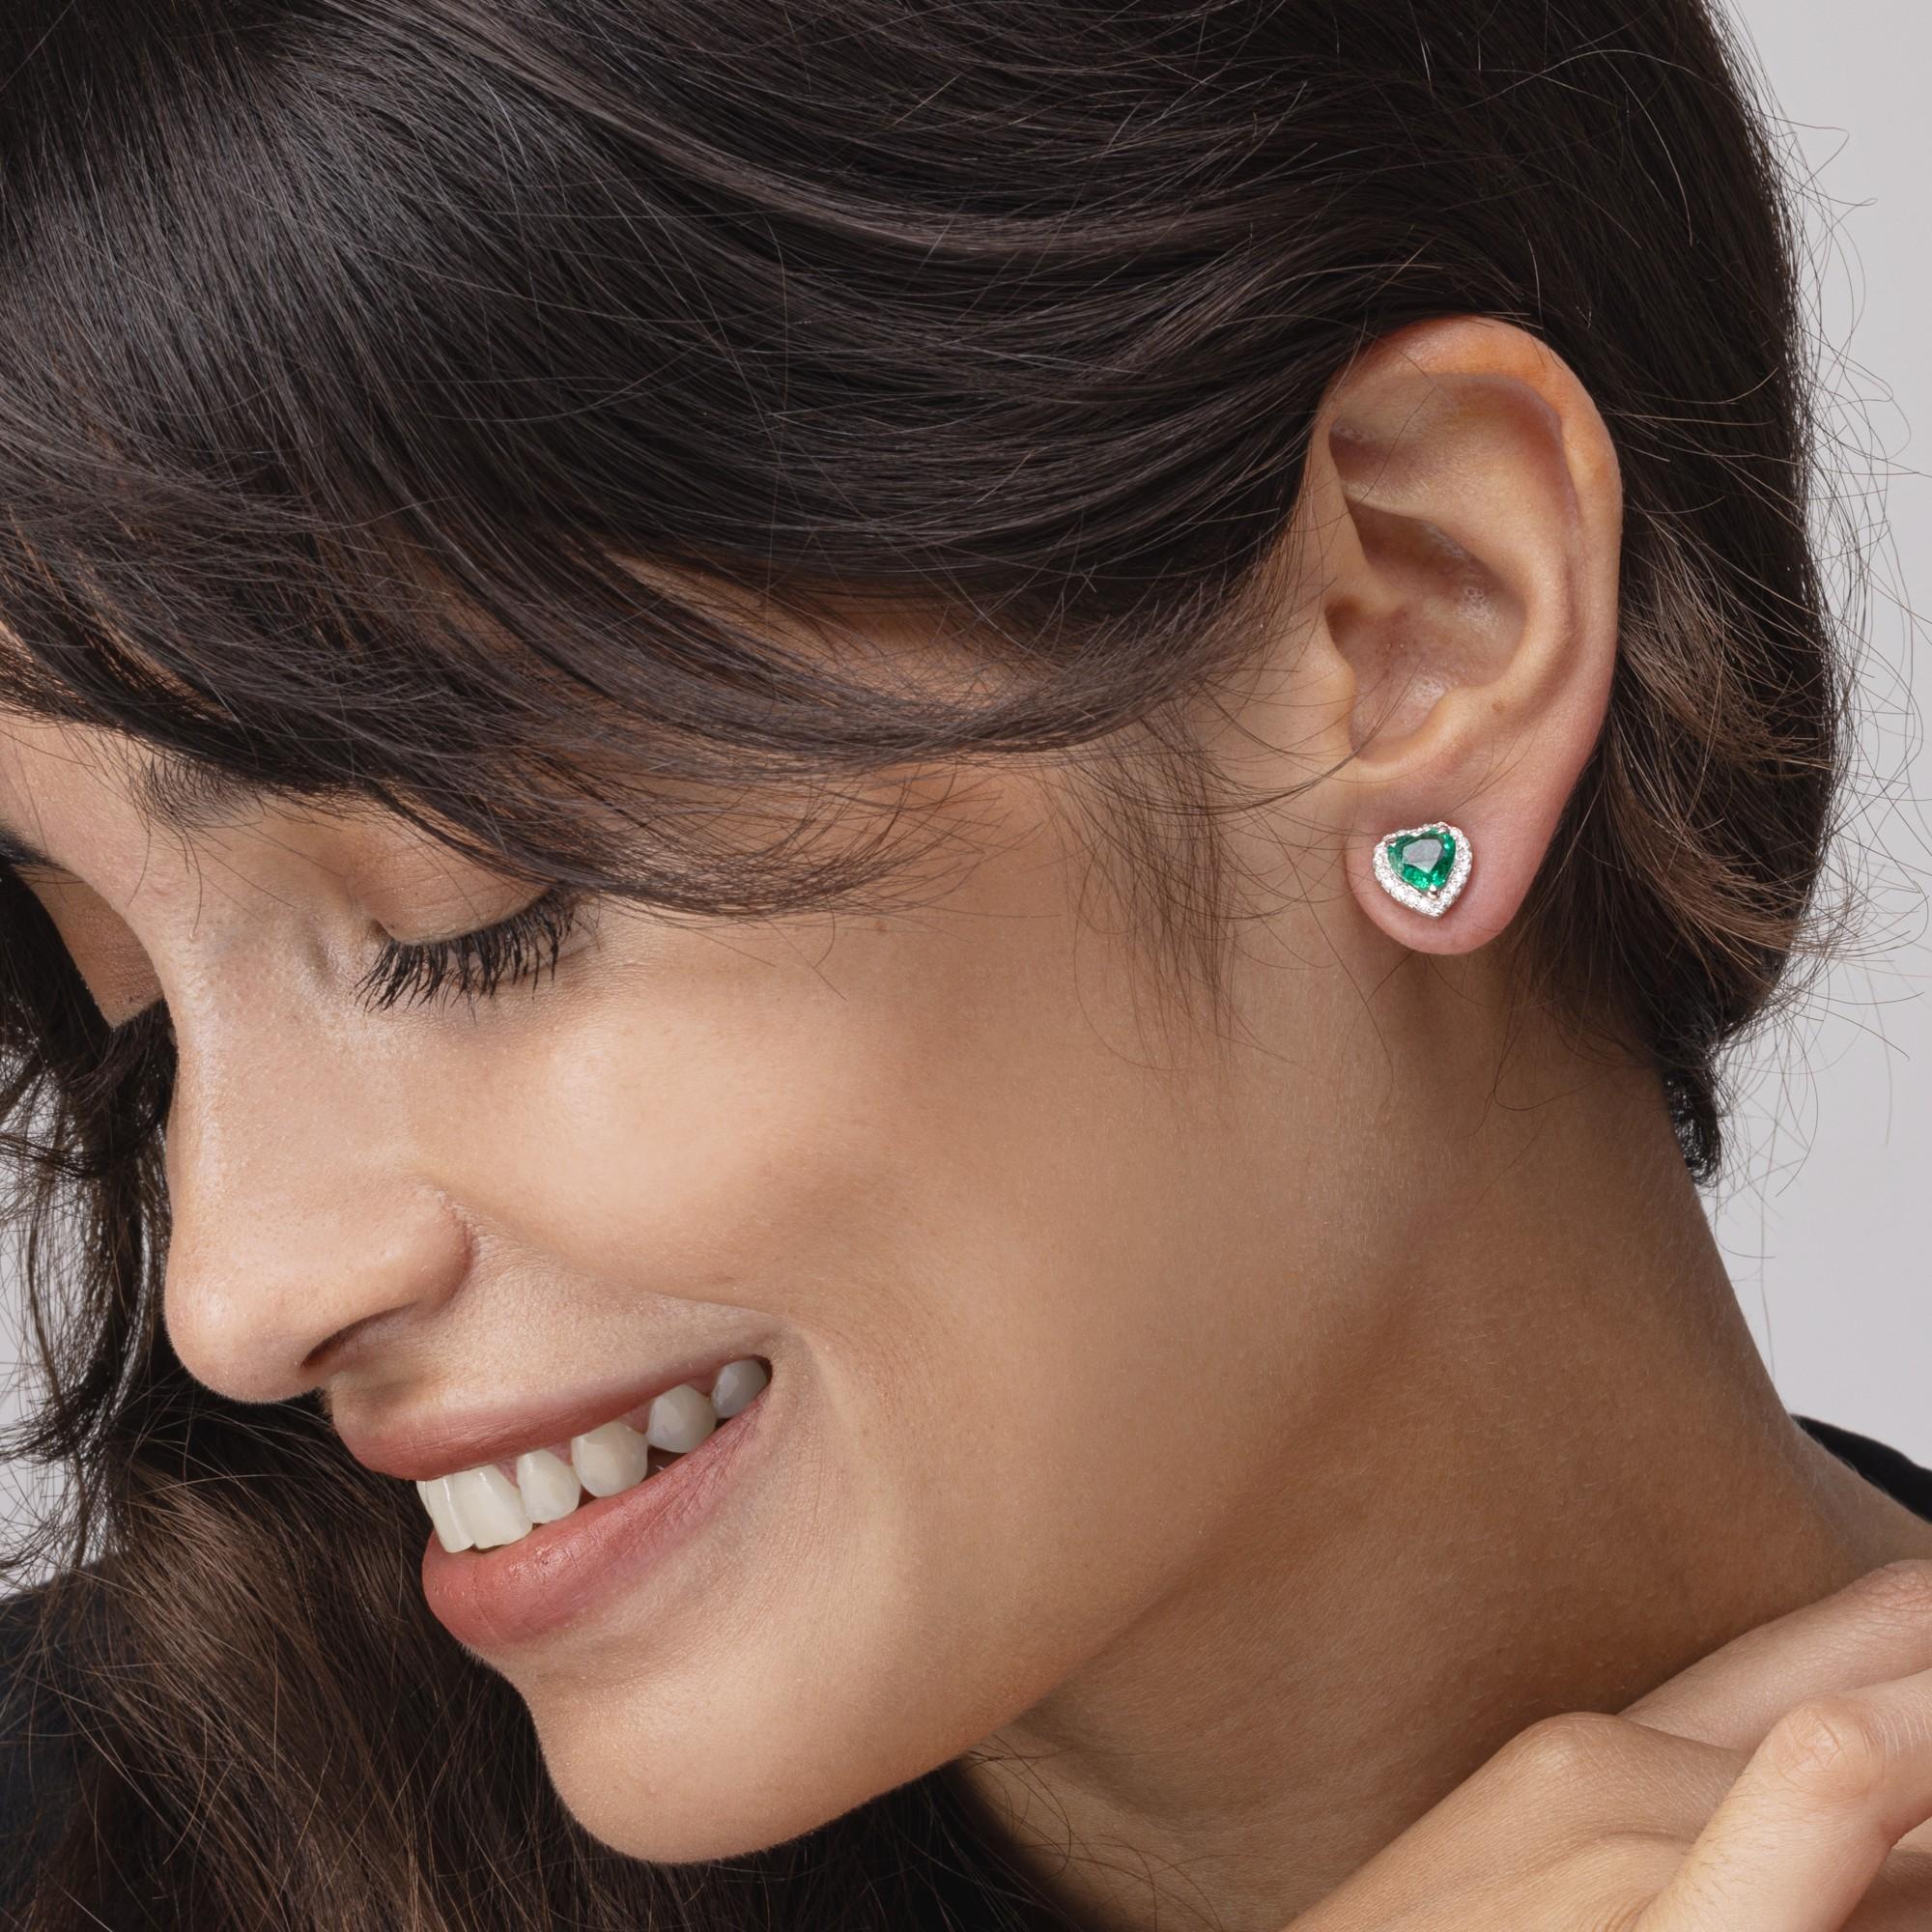 Alex Jona design collection, hand crafted in Italy, 18 karat white gold stud earrings set with 1.96 carats of heart cut emeralds and 0.35 carats of white diamonds.

Alex Jona jewels stand out, not only for their special design and for the excellent